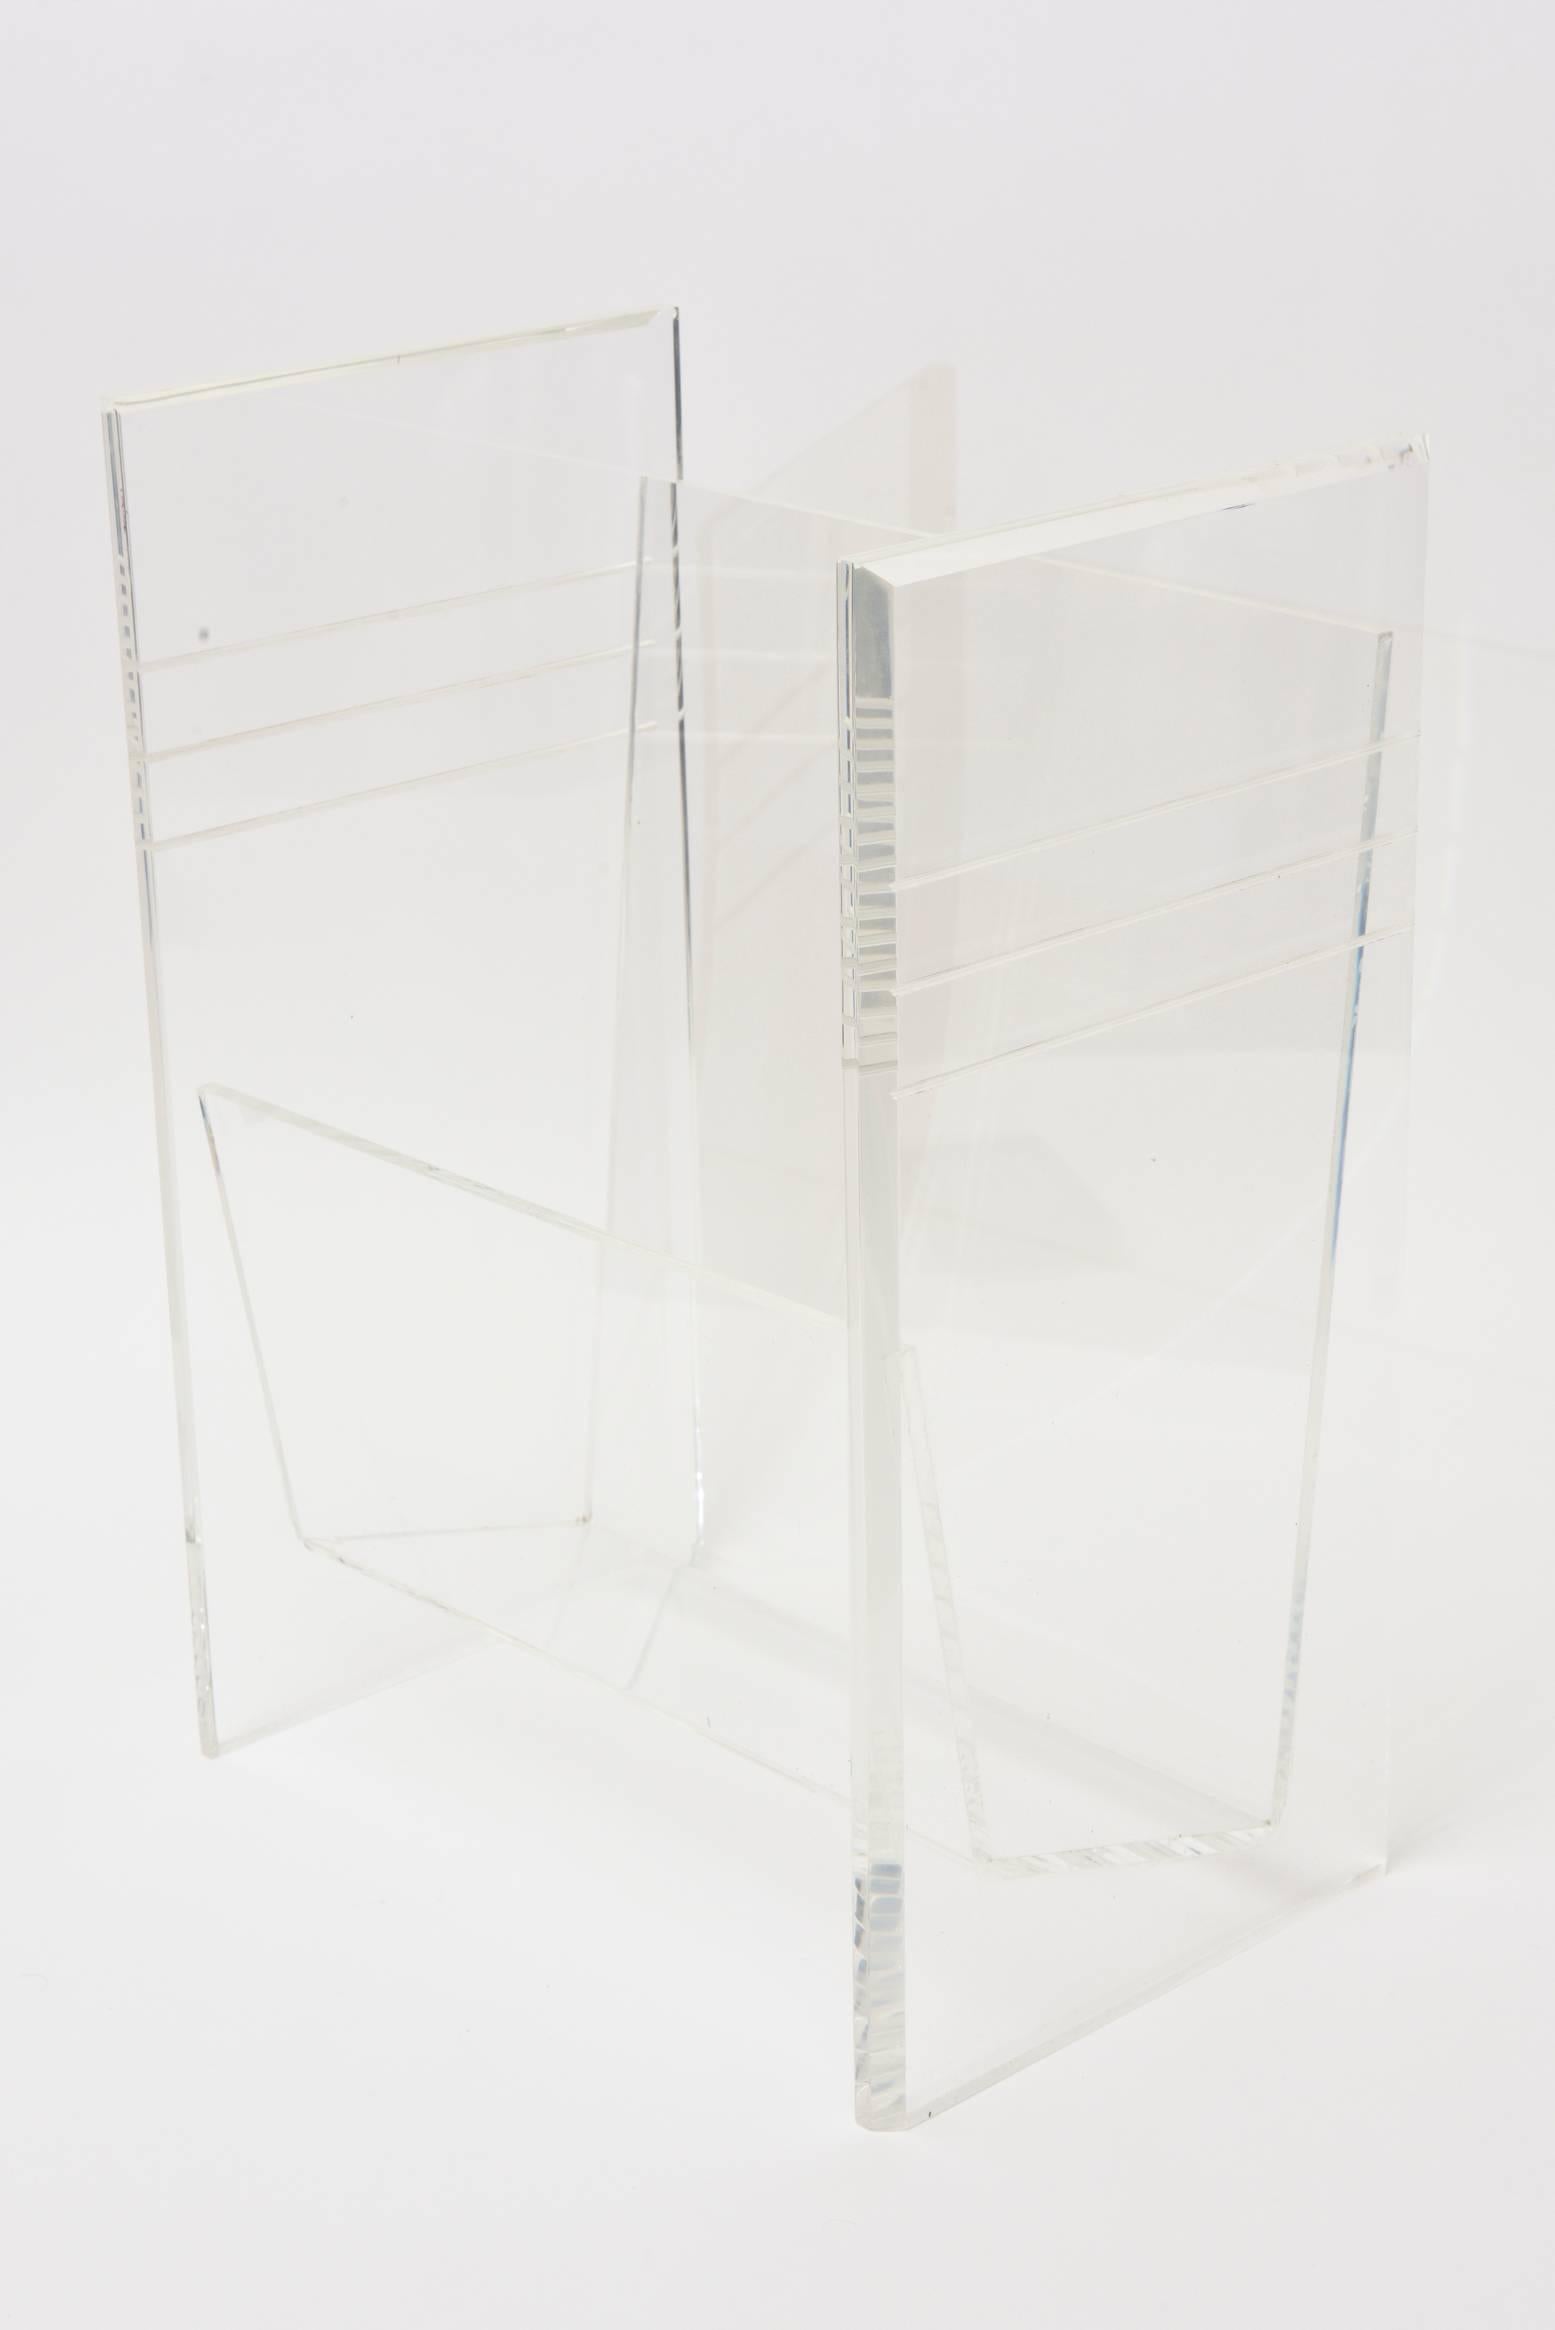 This vintage lucite magazine stand, rack or holder is sturdy and has one compartment. It is in very great condition from the 1970s. Great to place anywhere in your home or study as it will not deter from your design. Sorry the photos because of the